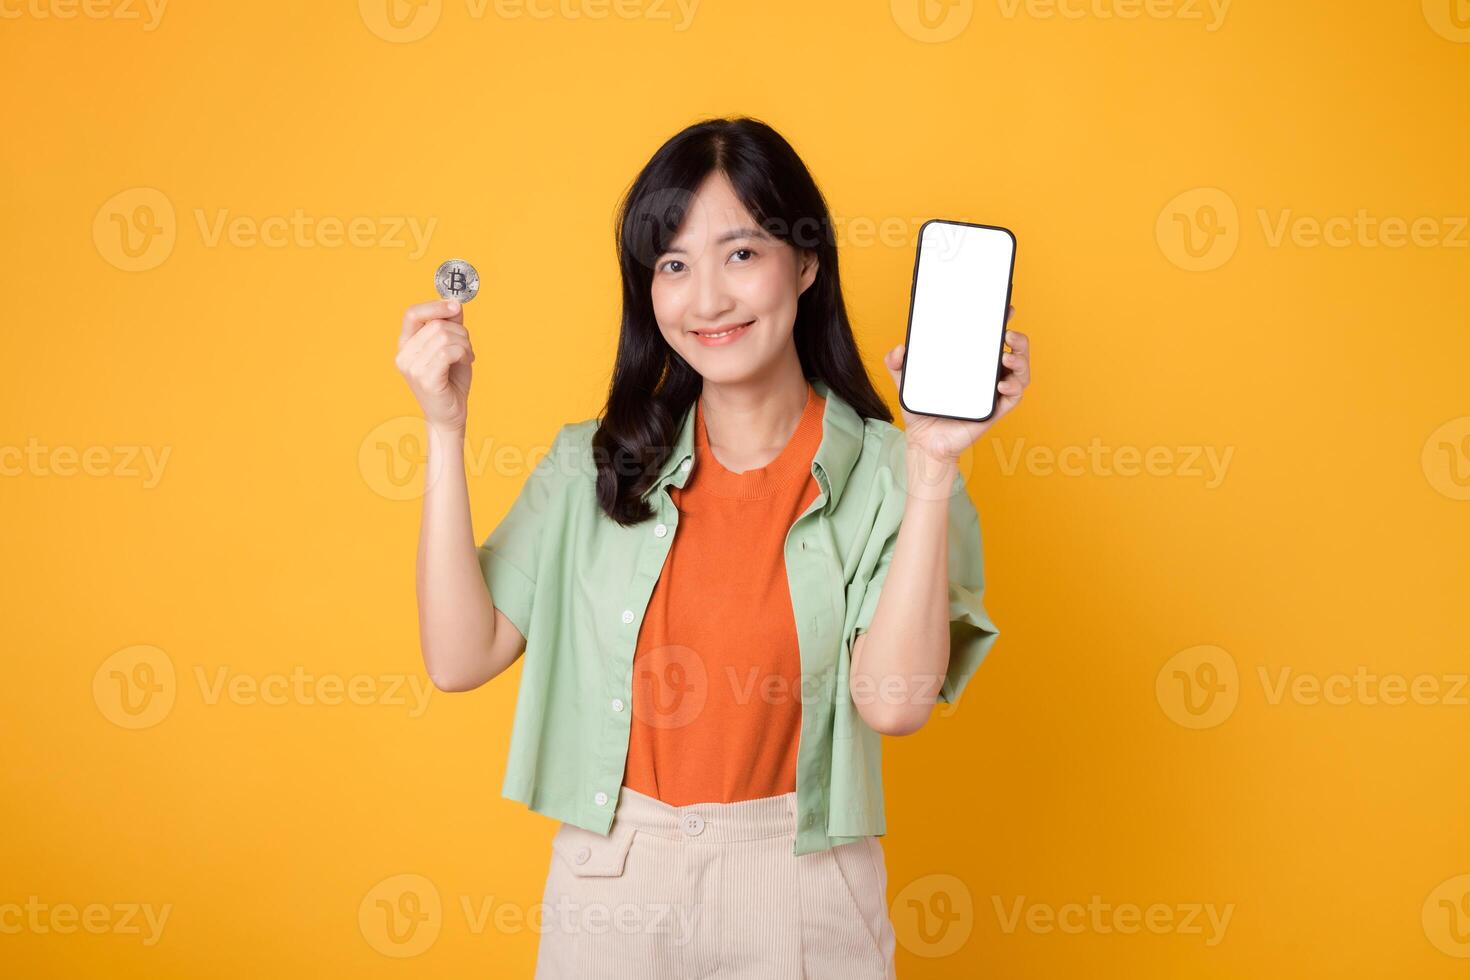 young 30s asian woman happy face dressed in orange shirt and green jumper showing smartphone screen display and crypto currency coin isolated on yellow background. Future finance concept. photo